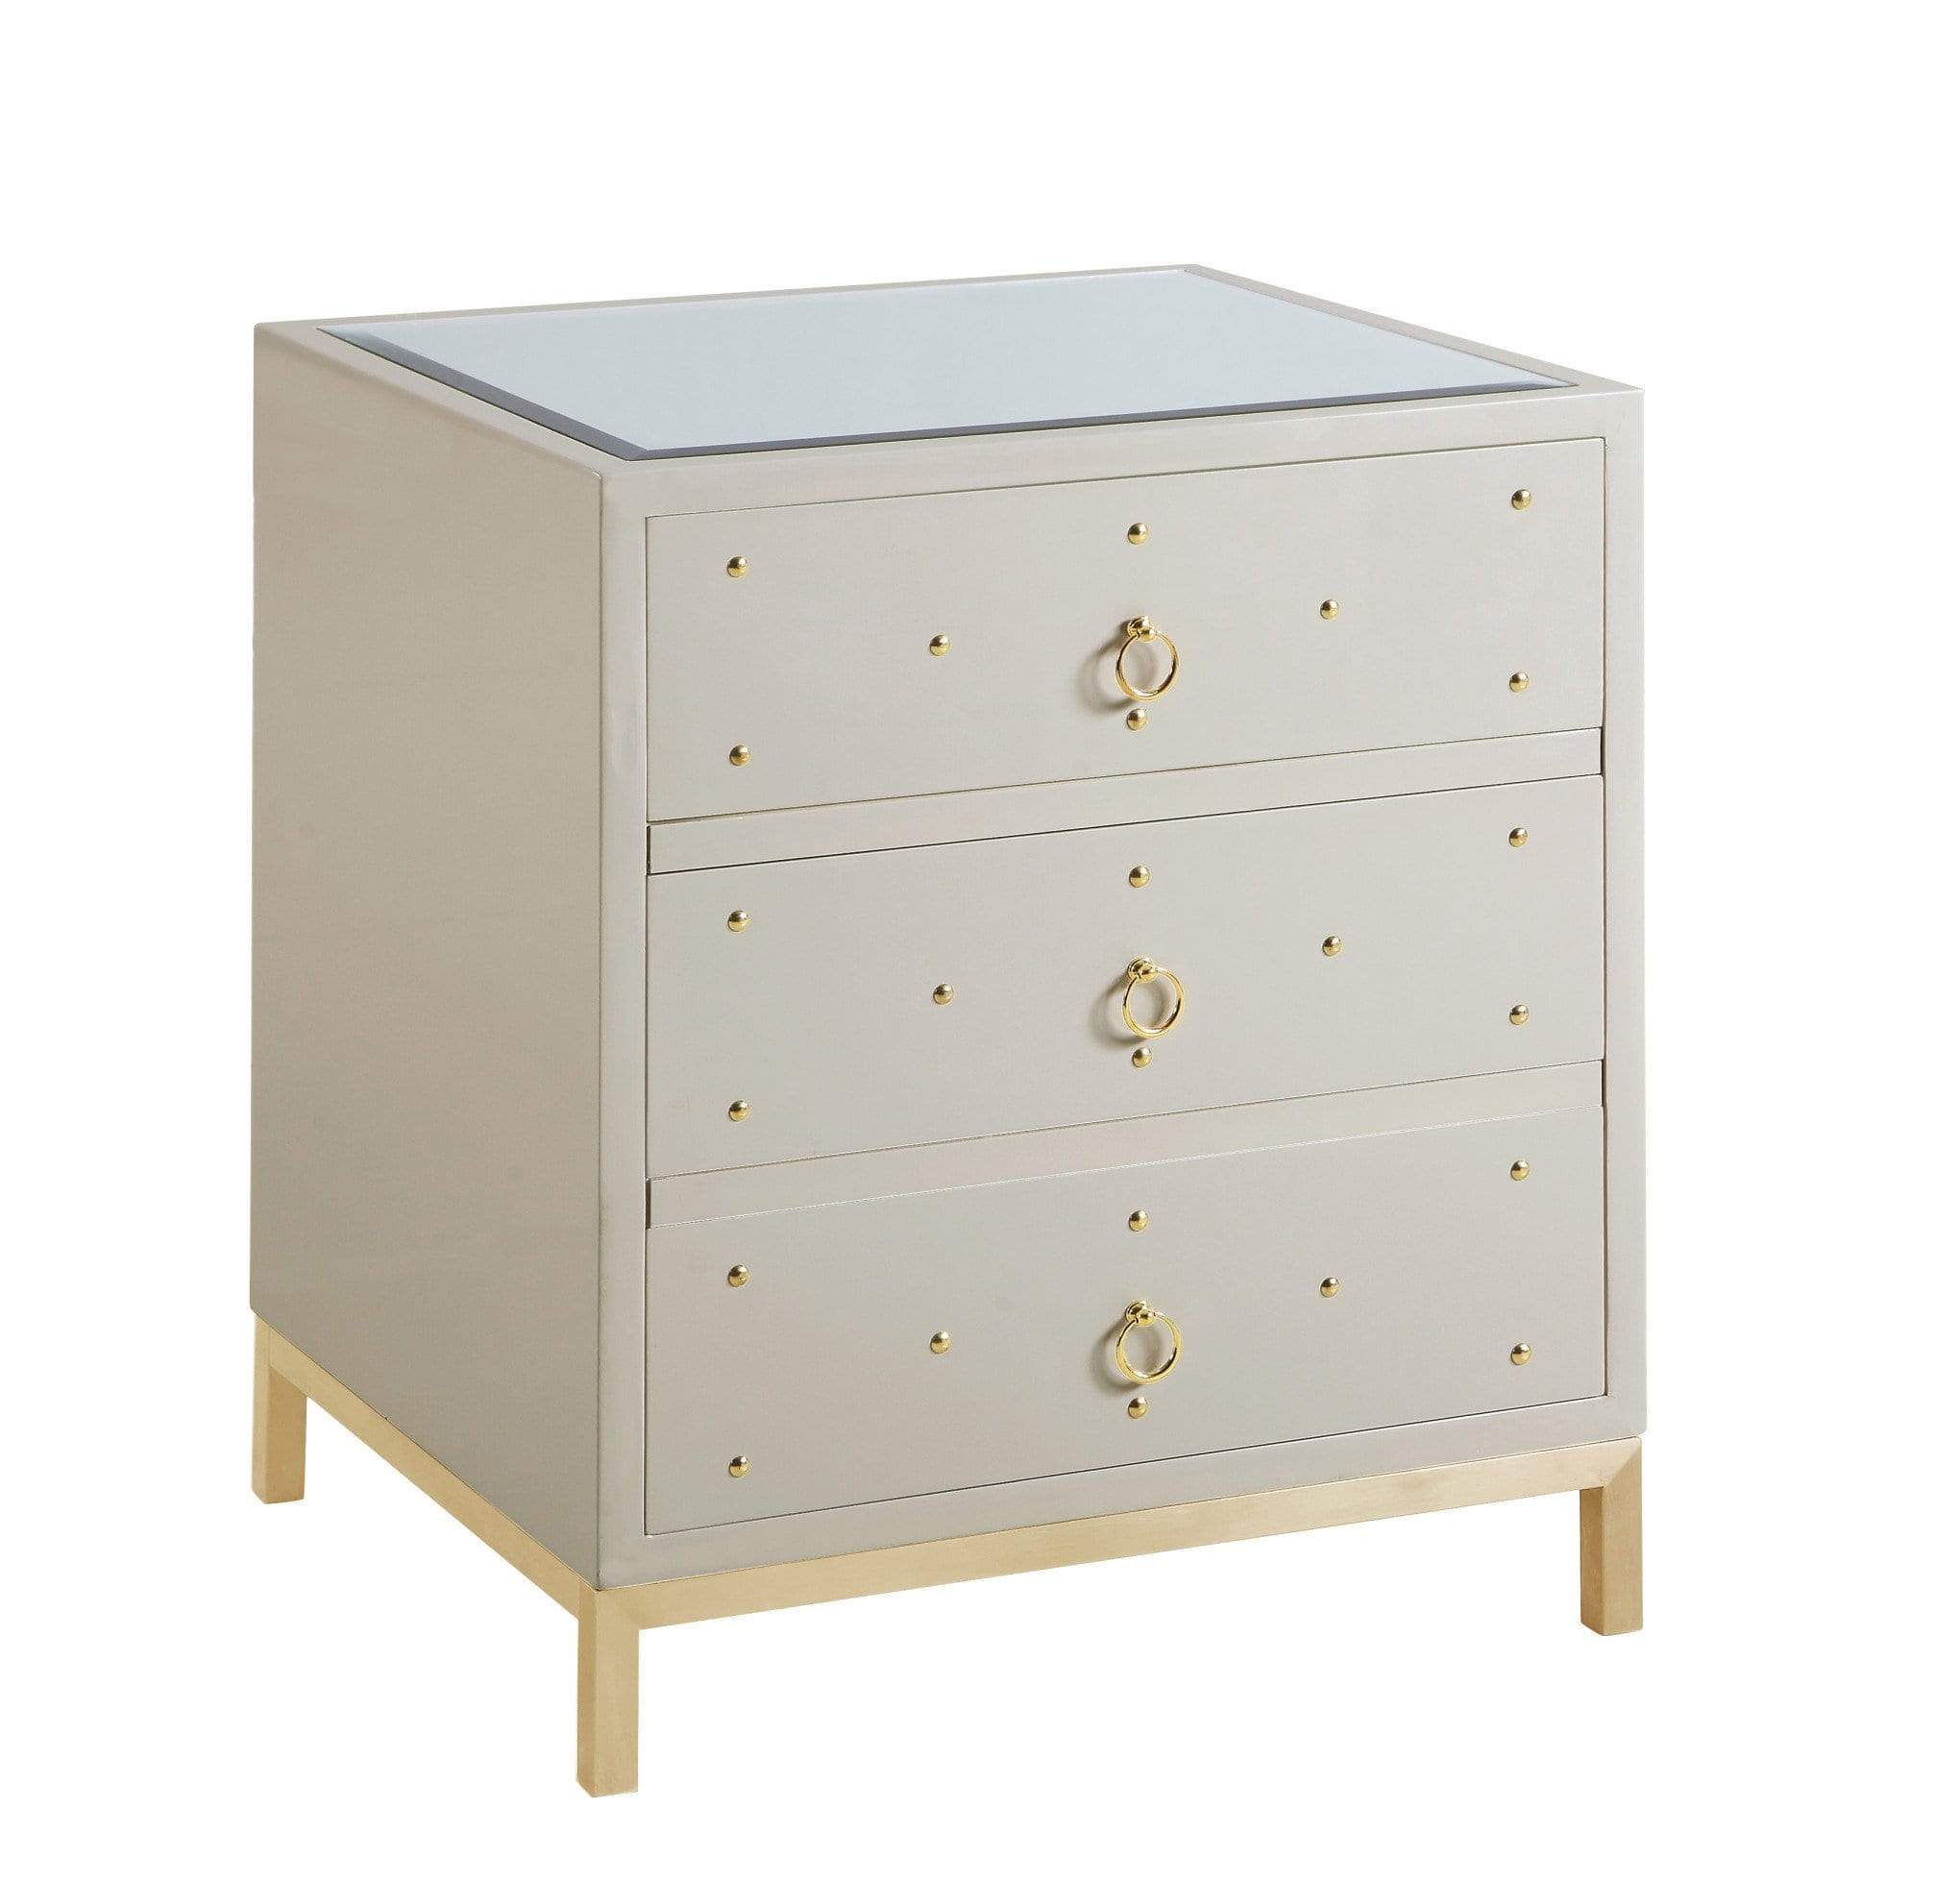 Arezzo Nightstand | End Side Table